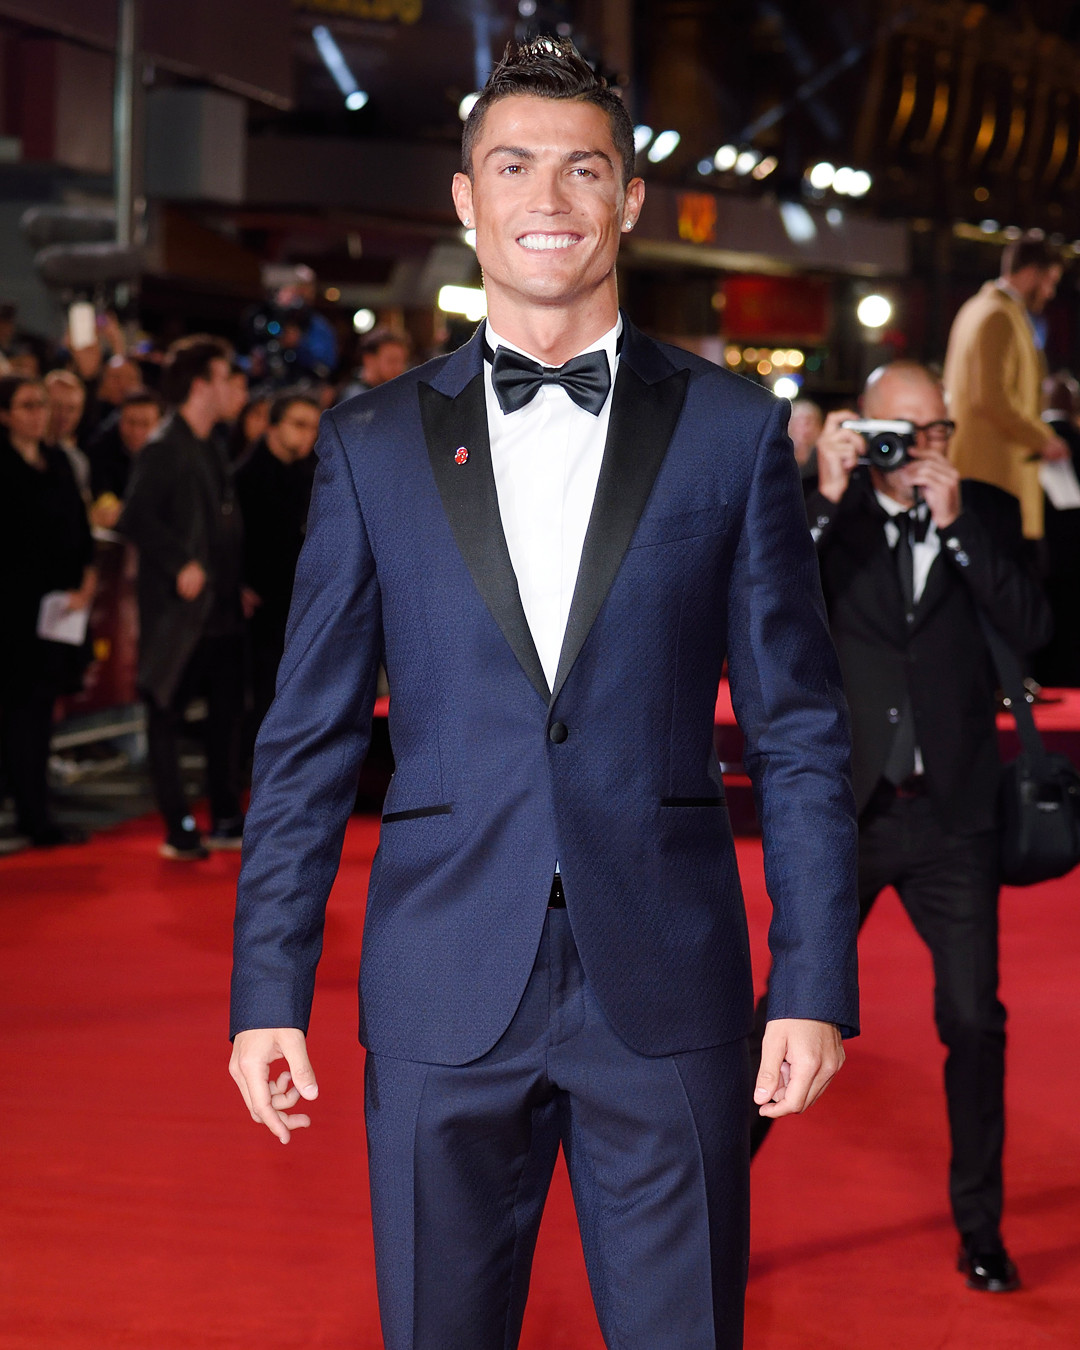 Cristiano Ronaldo and More World Cup Players That Are Menswear Goals